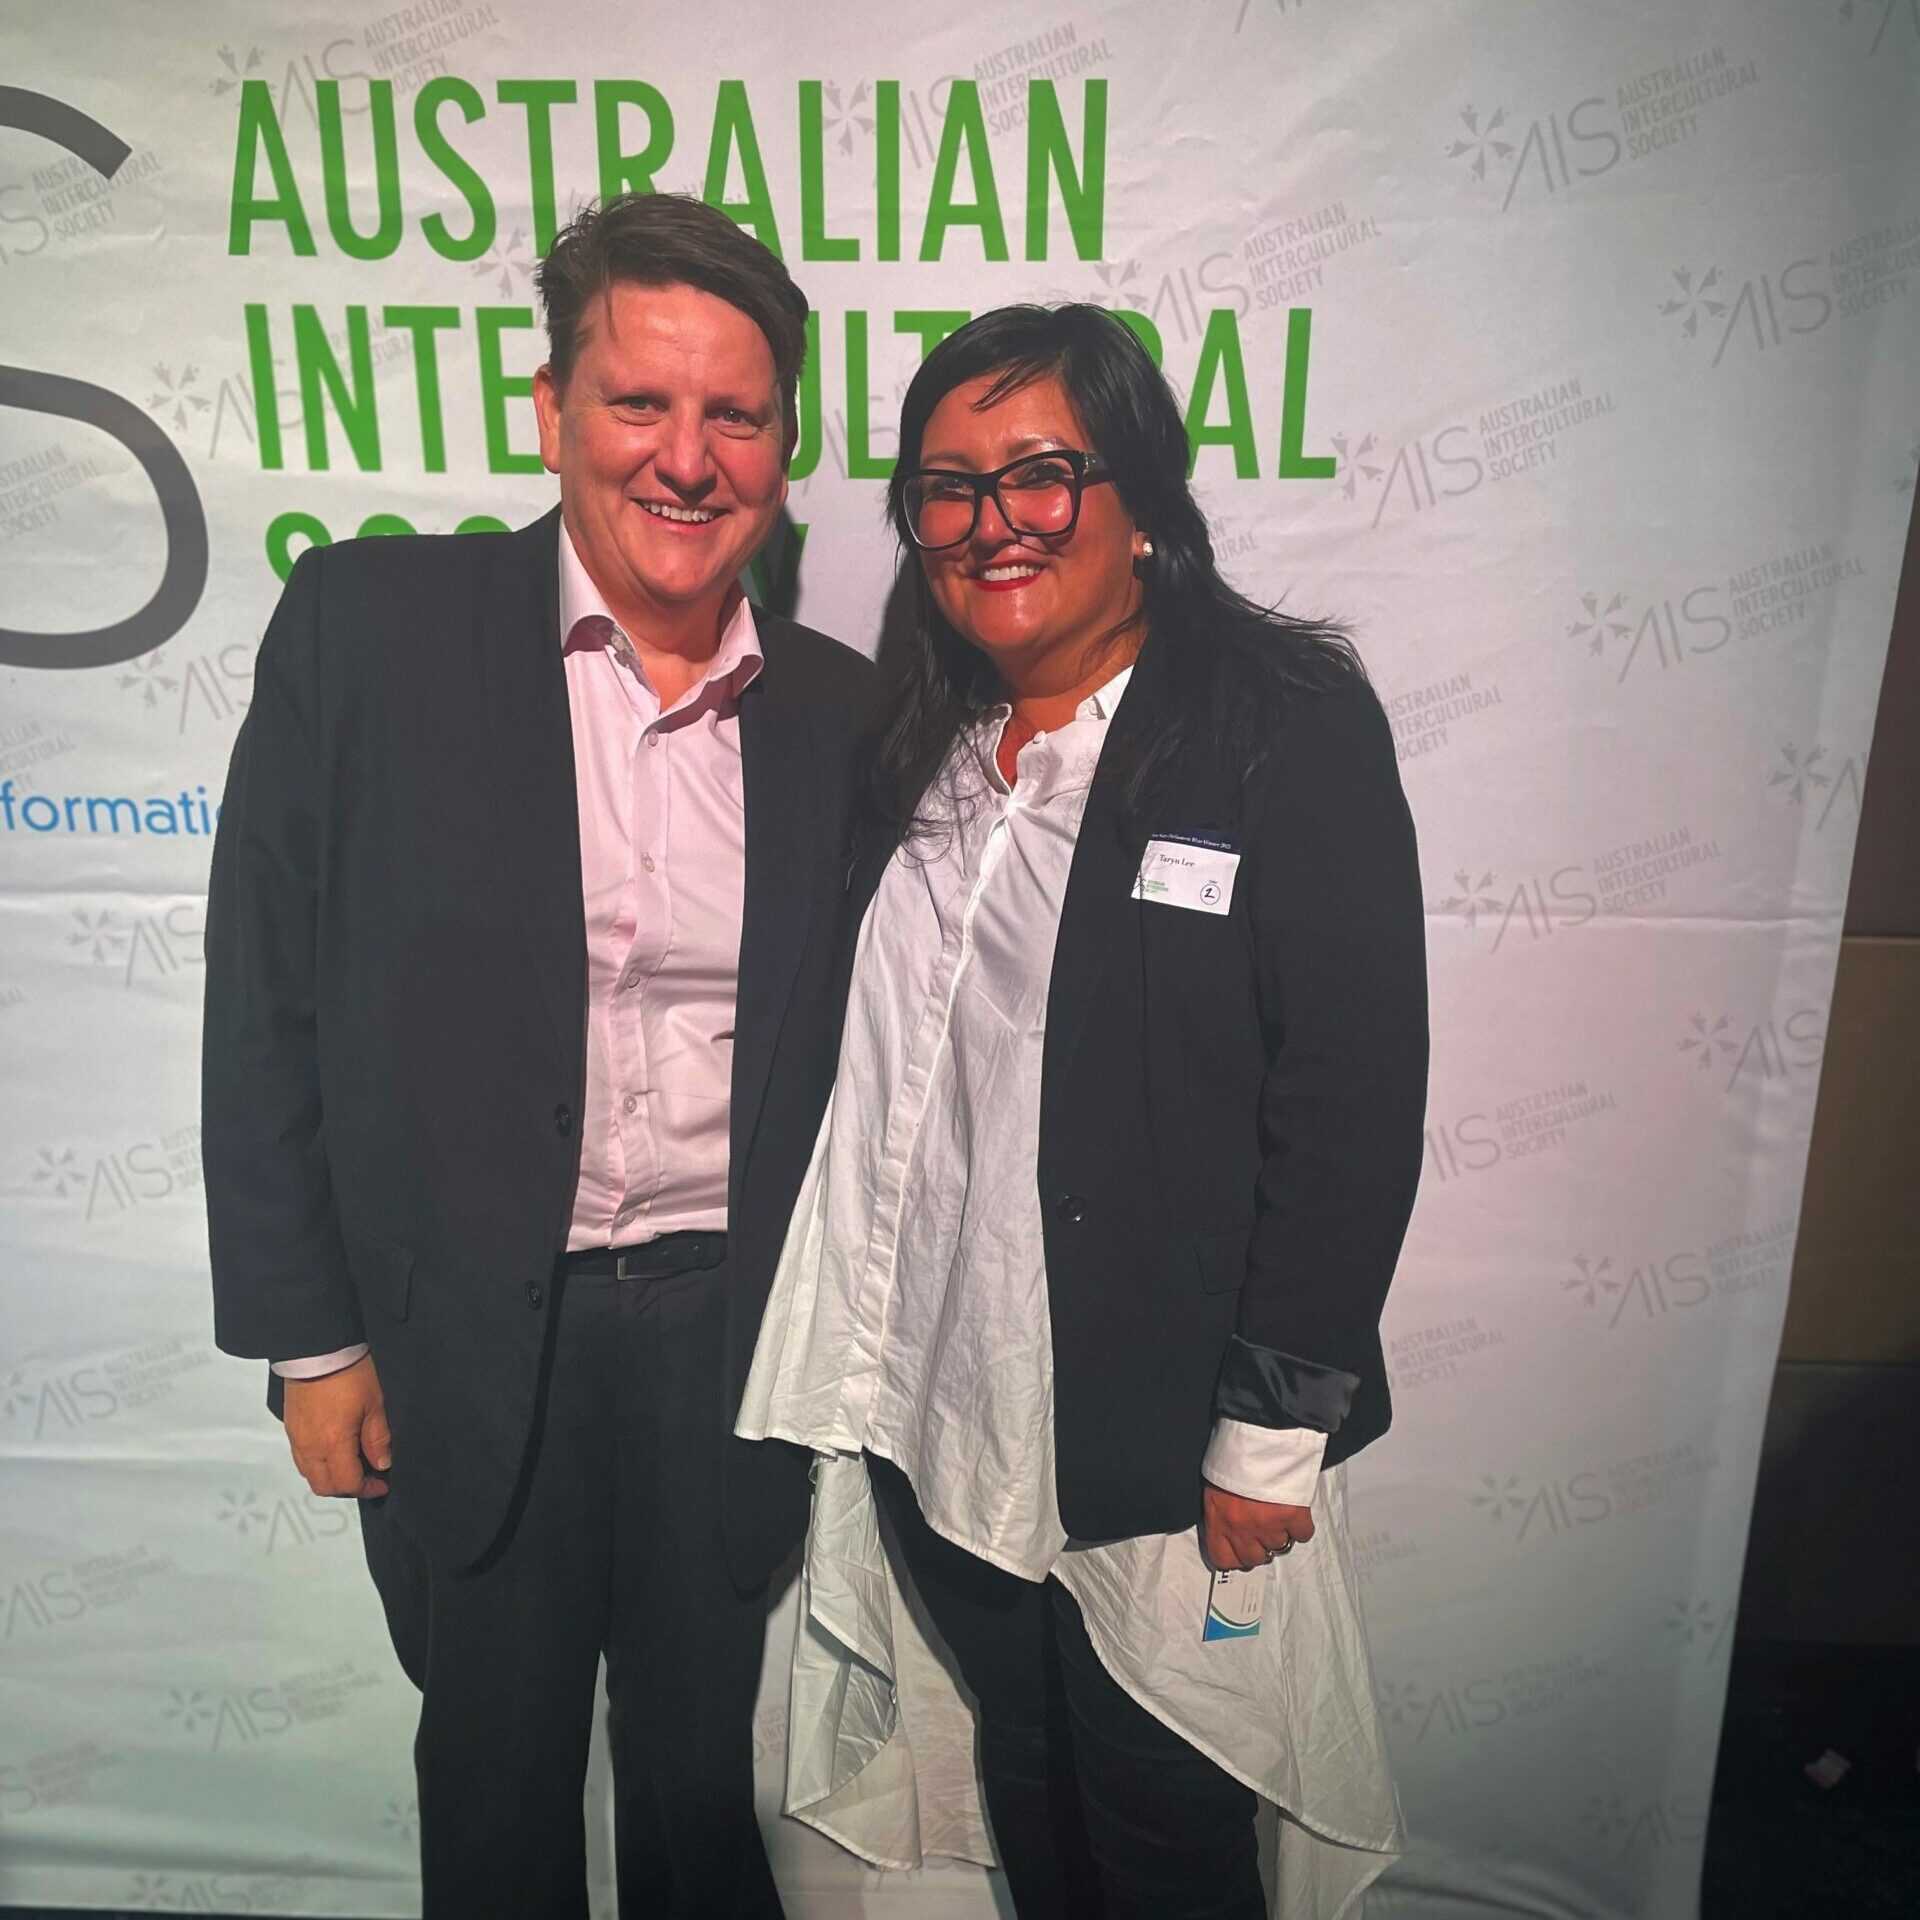 Ro Allen (left) and Taryn Lee (right) standing side-by-side, smiling in front of a banner which reads: Australian Intercultural Society